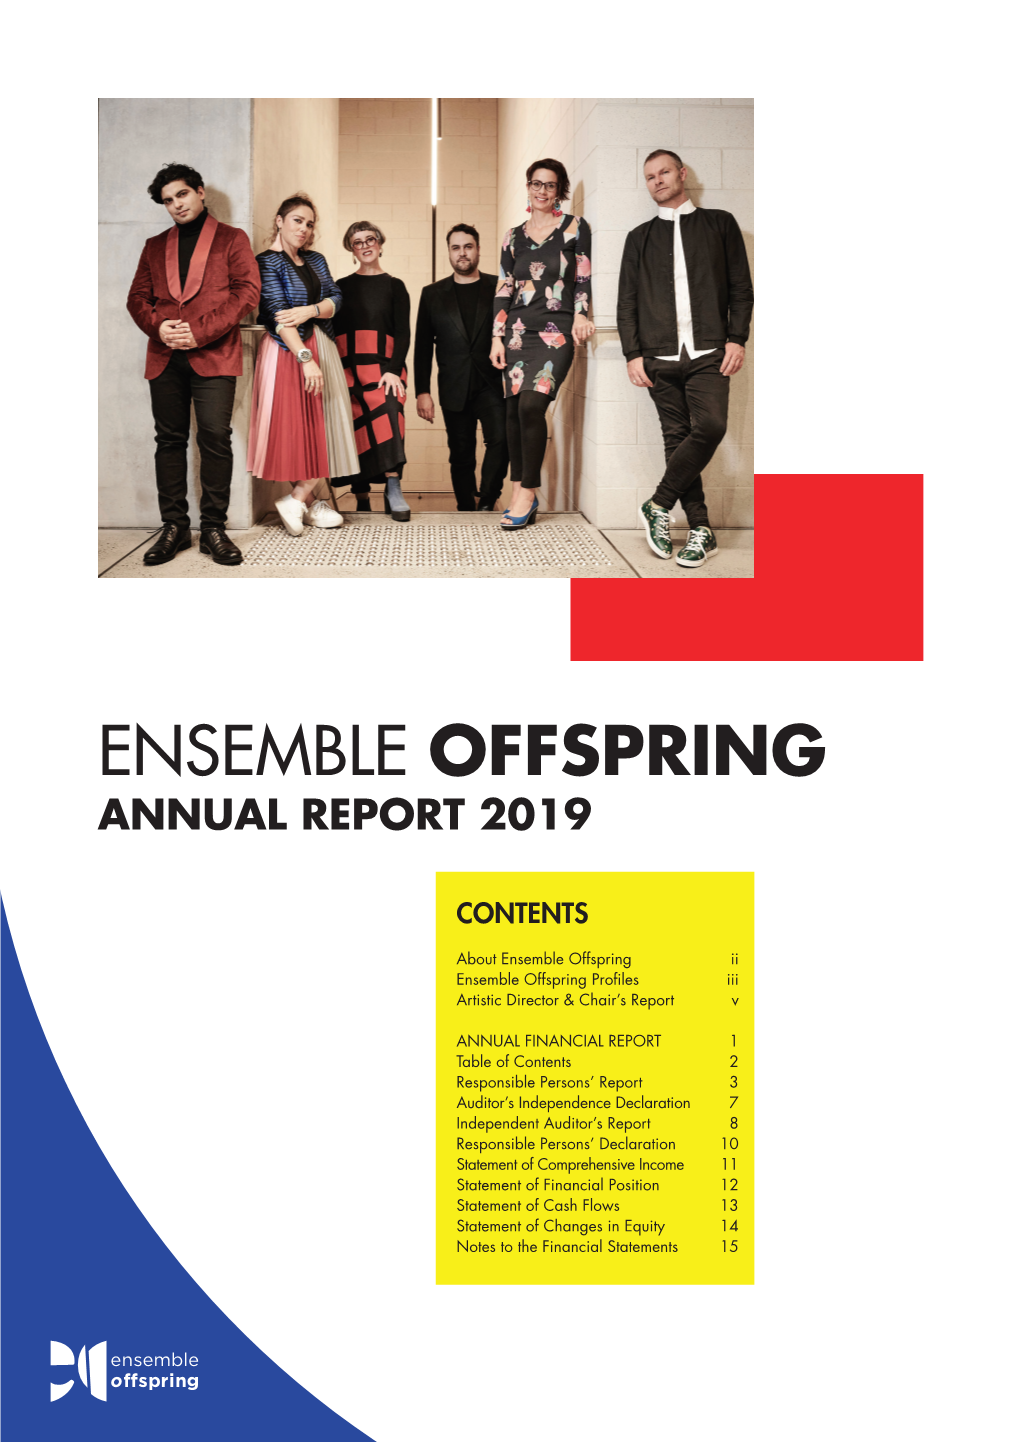 About Ensemble Offspring Ii Ensemble Offspring Profiles Iii Artistic Director & Chair’S Report V